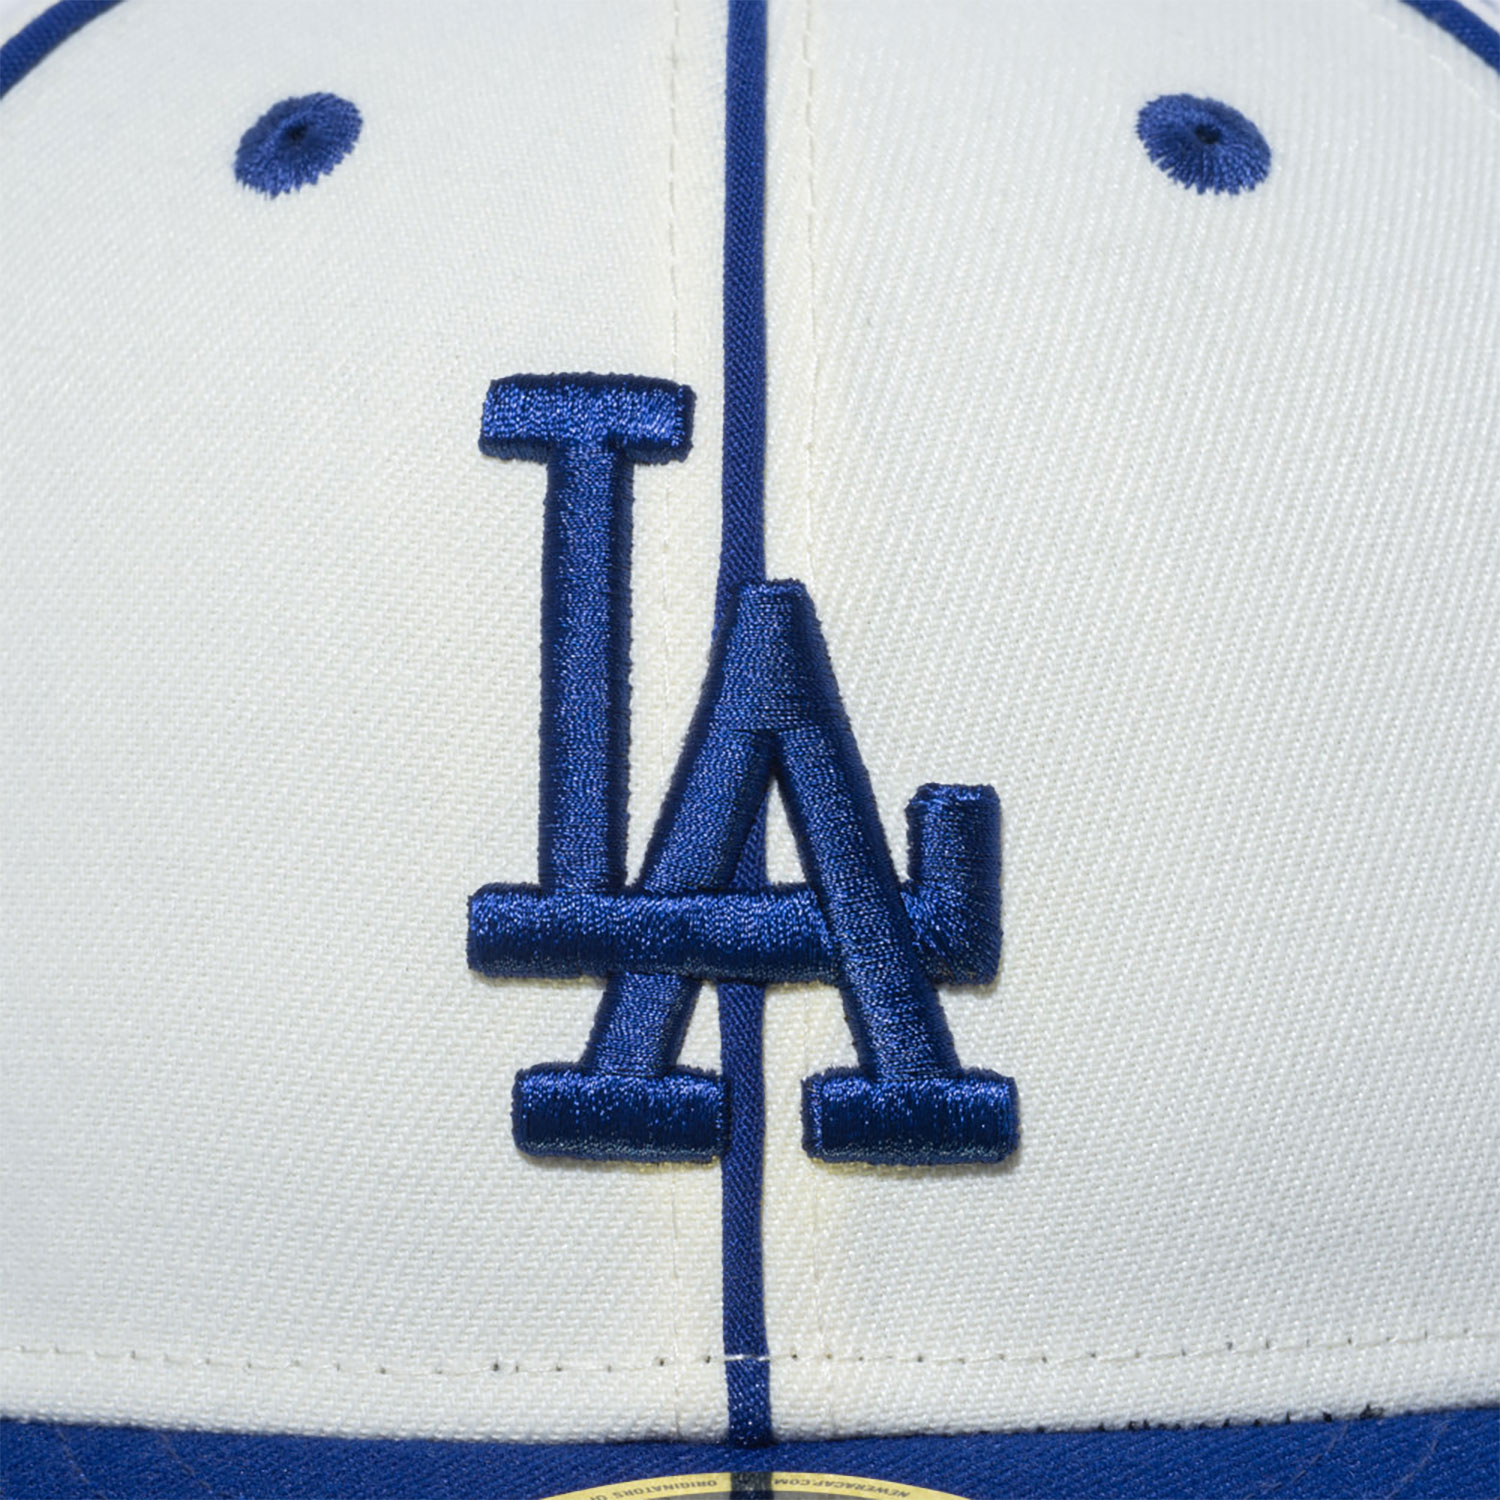 LA Dodgers Japan MLB Piping White Low Profile 59FIFTY Fitted Cap